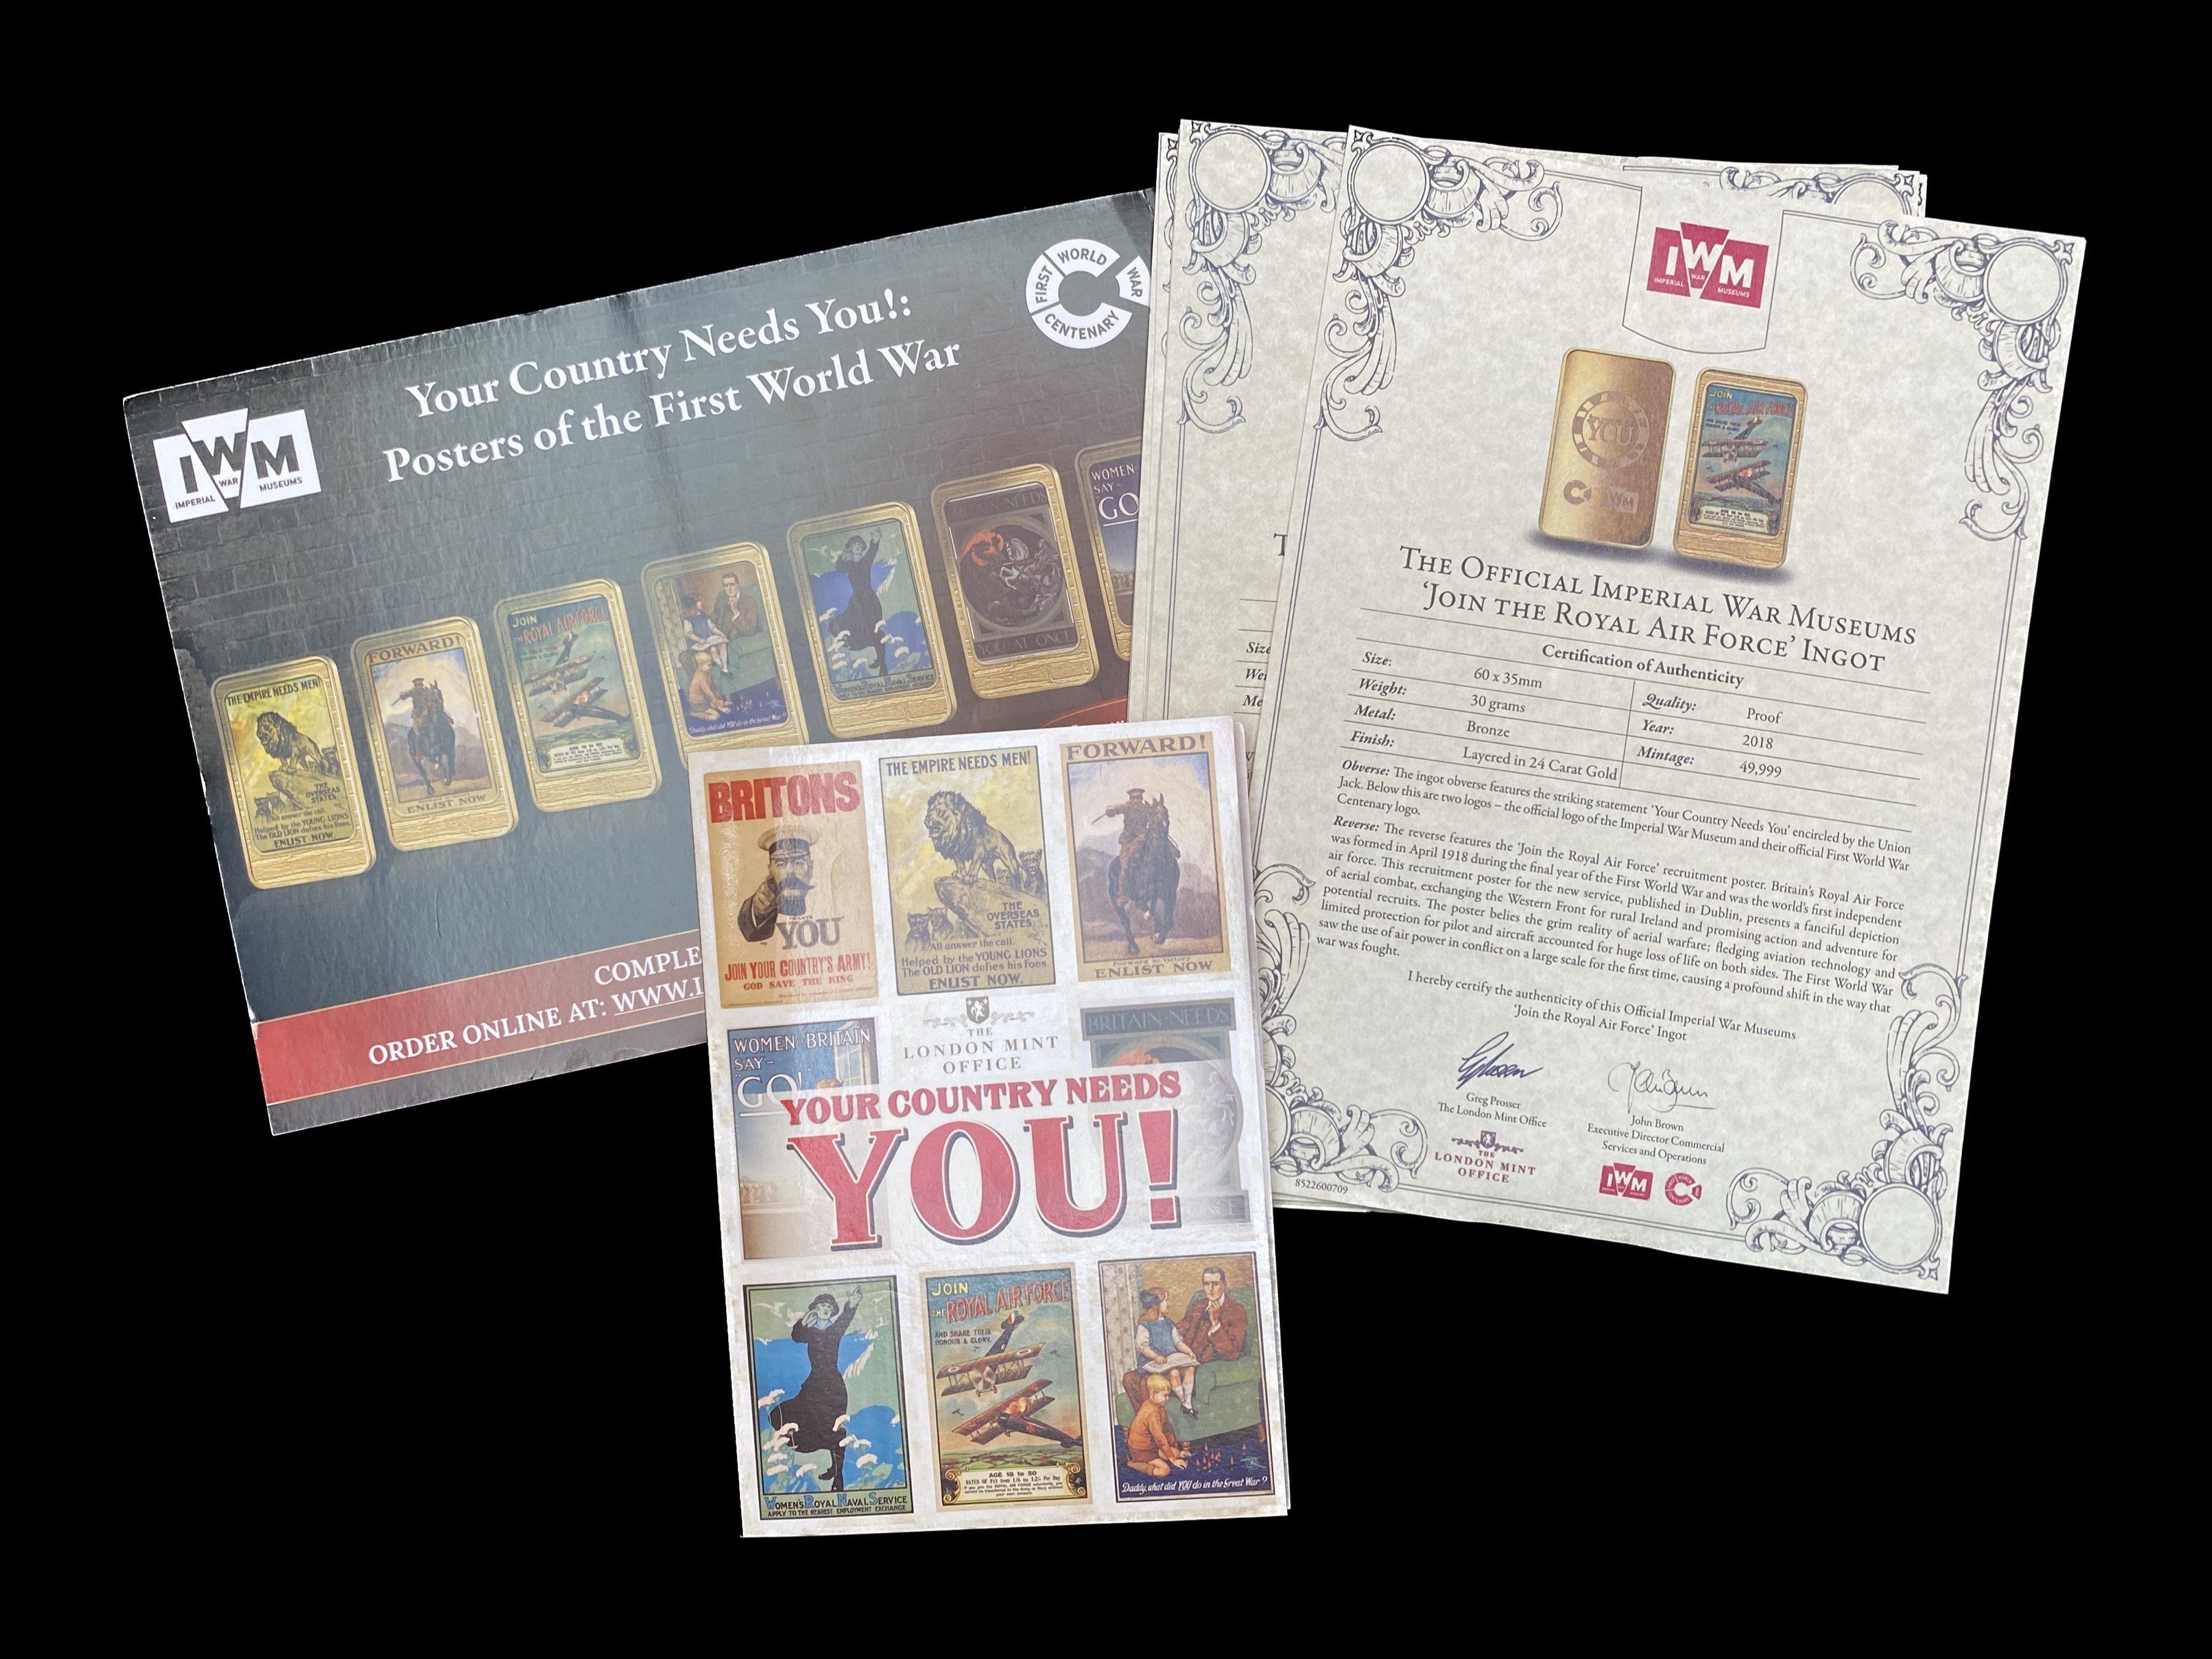 Superb The London Mint ' Your Country Needs You ' Posters of the First World War Ingot Set Together - Image 5 of 5